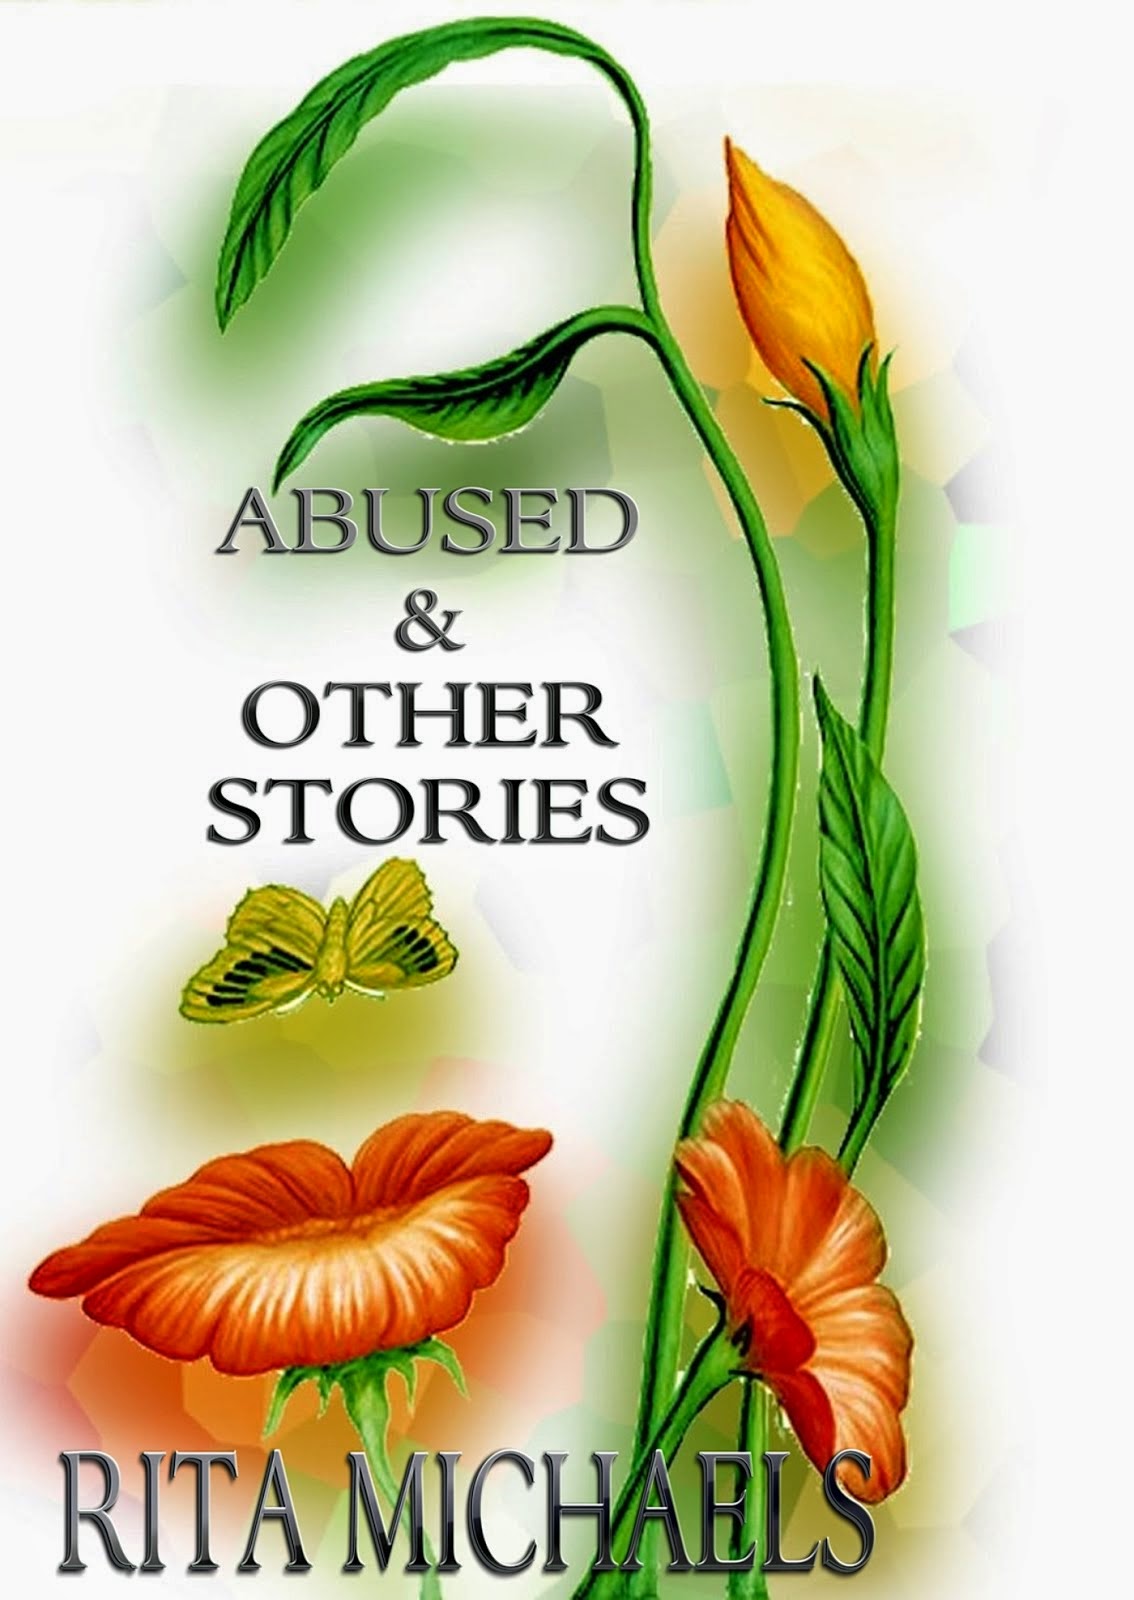 ABUSED & OTHER STORIES